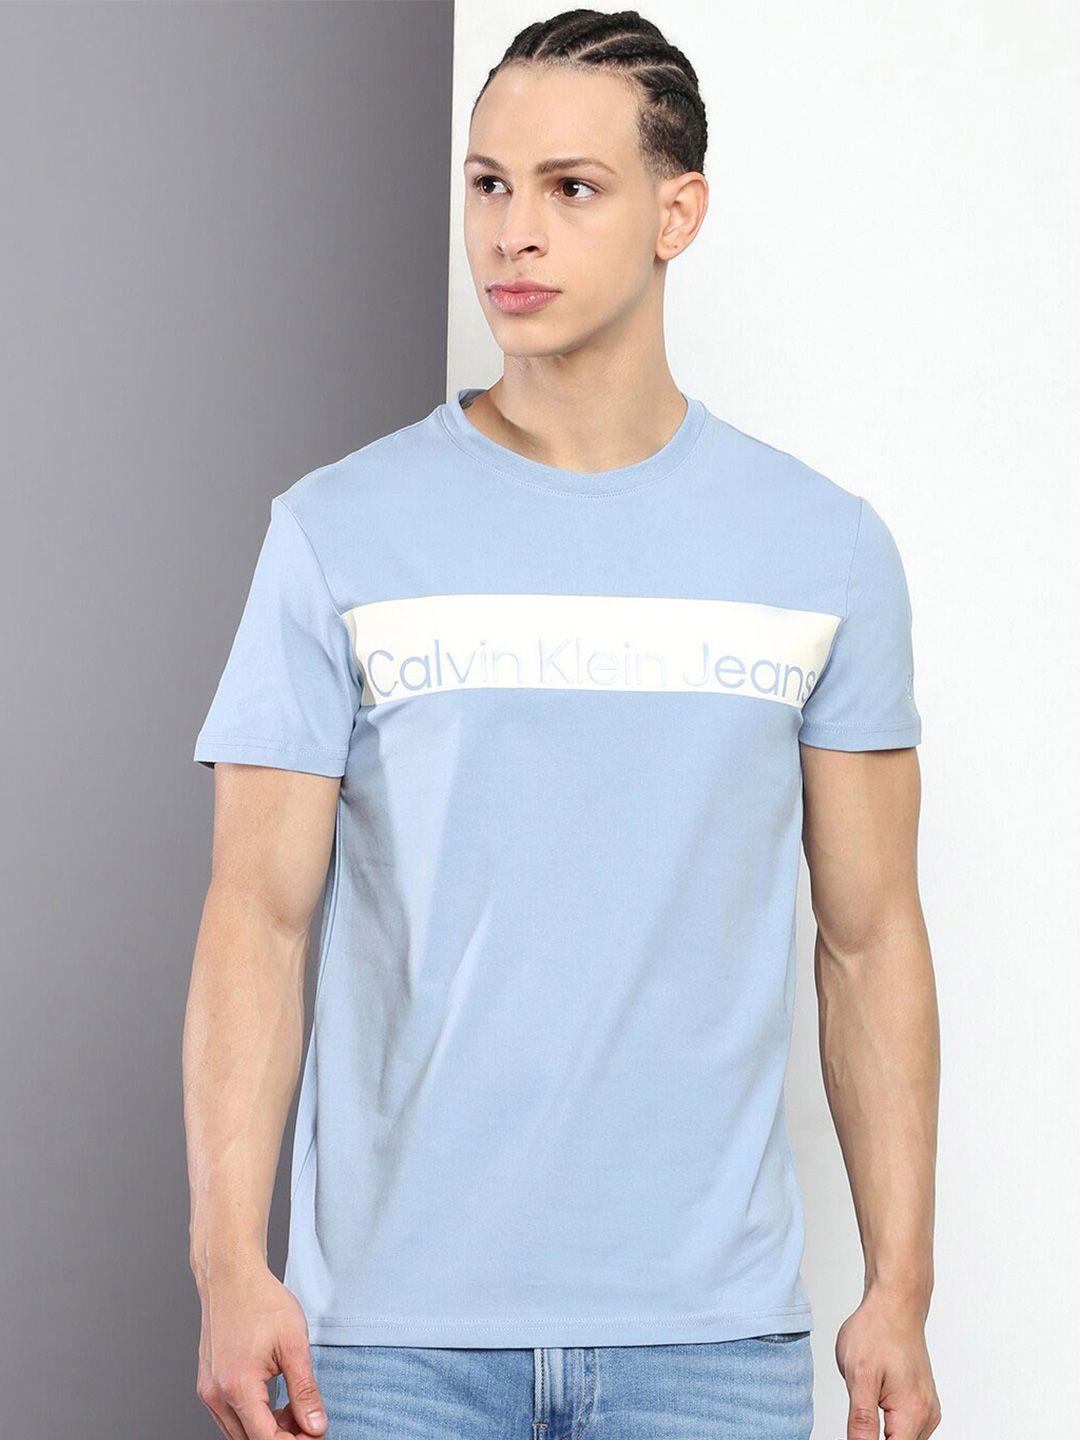 calvin klein jeans typography printed slim fit t-shirt